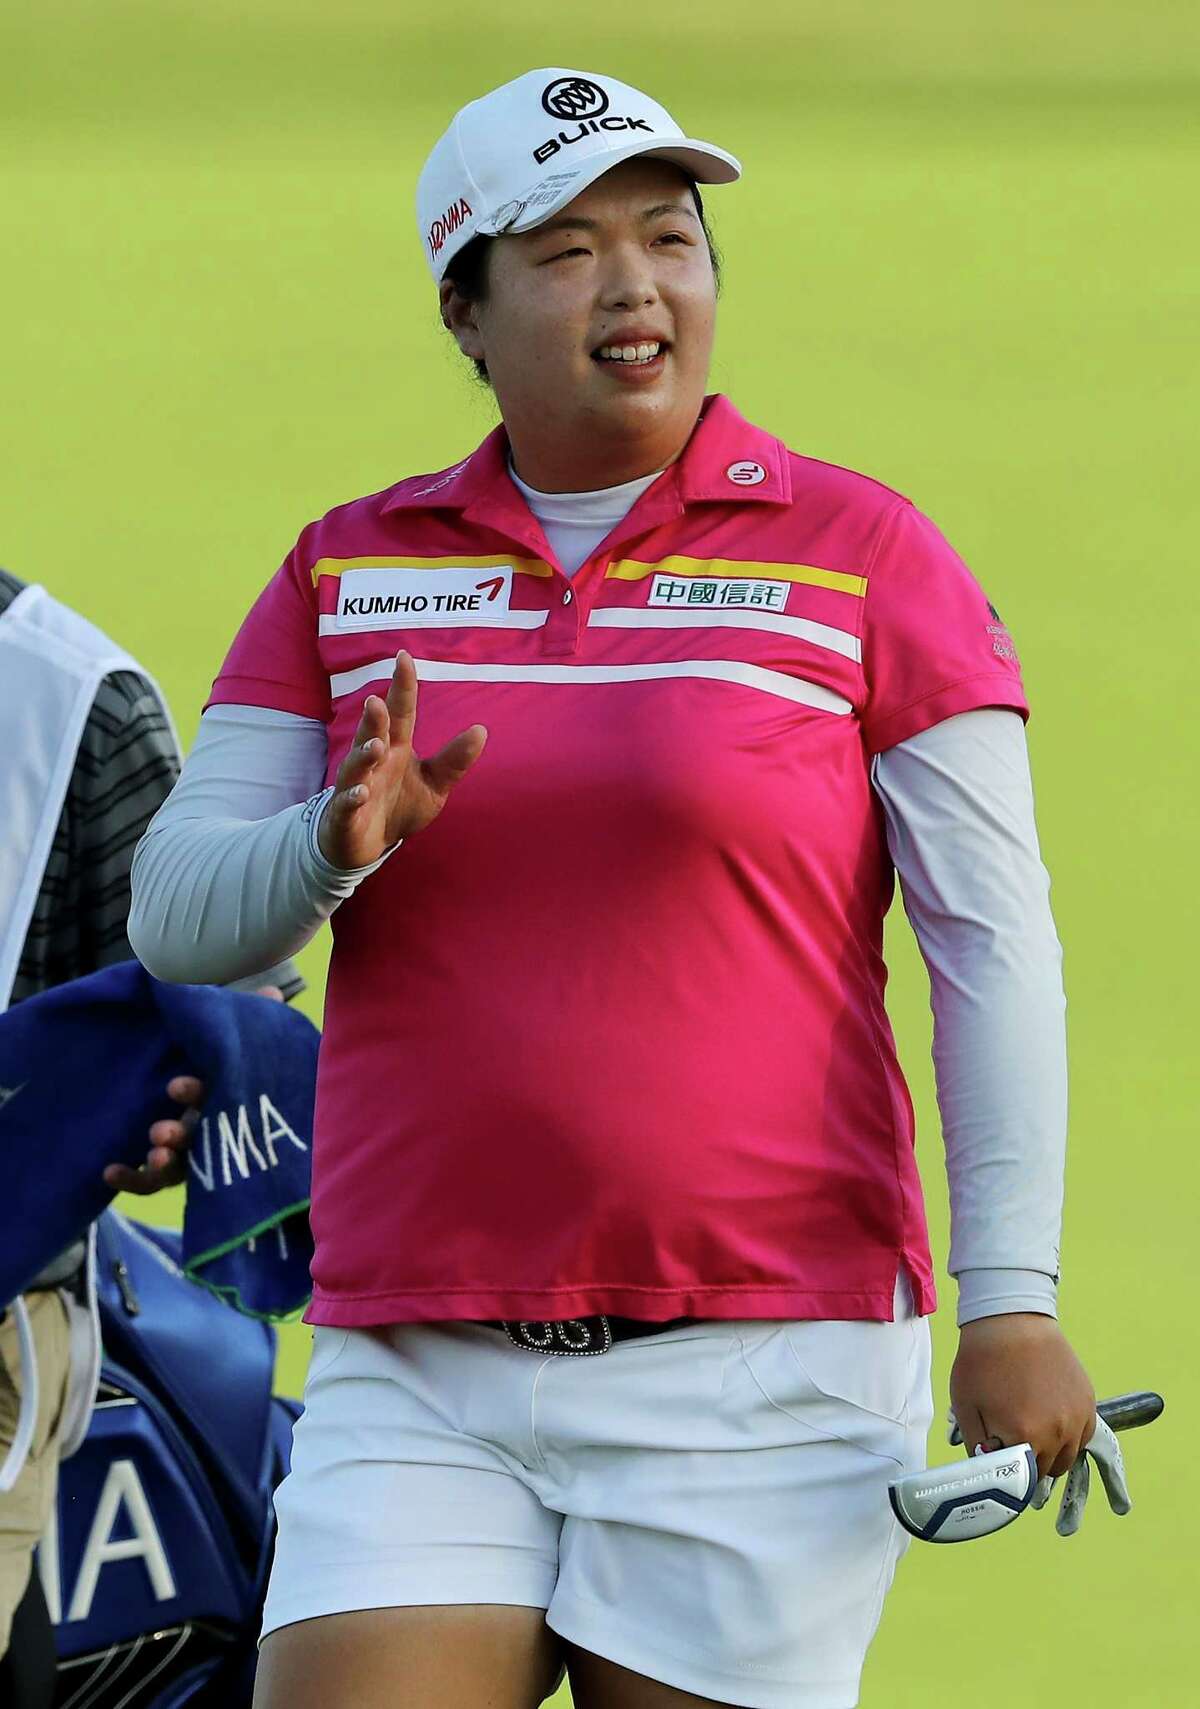 BEDMINSTER, NJ - JULY 15: Shanshan Feng of China greets the fans as she approaches the 18th green during the U.S. Women's Open round three on July 15, 2017 at Trump National Golf Club in Bedminster, New Jersey. (Photo by Elsa/Getty Images)